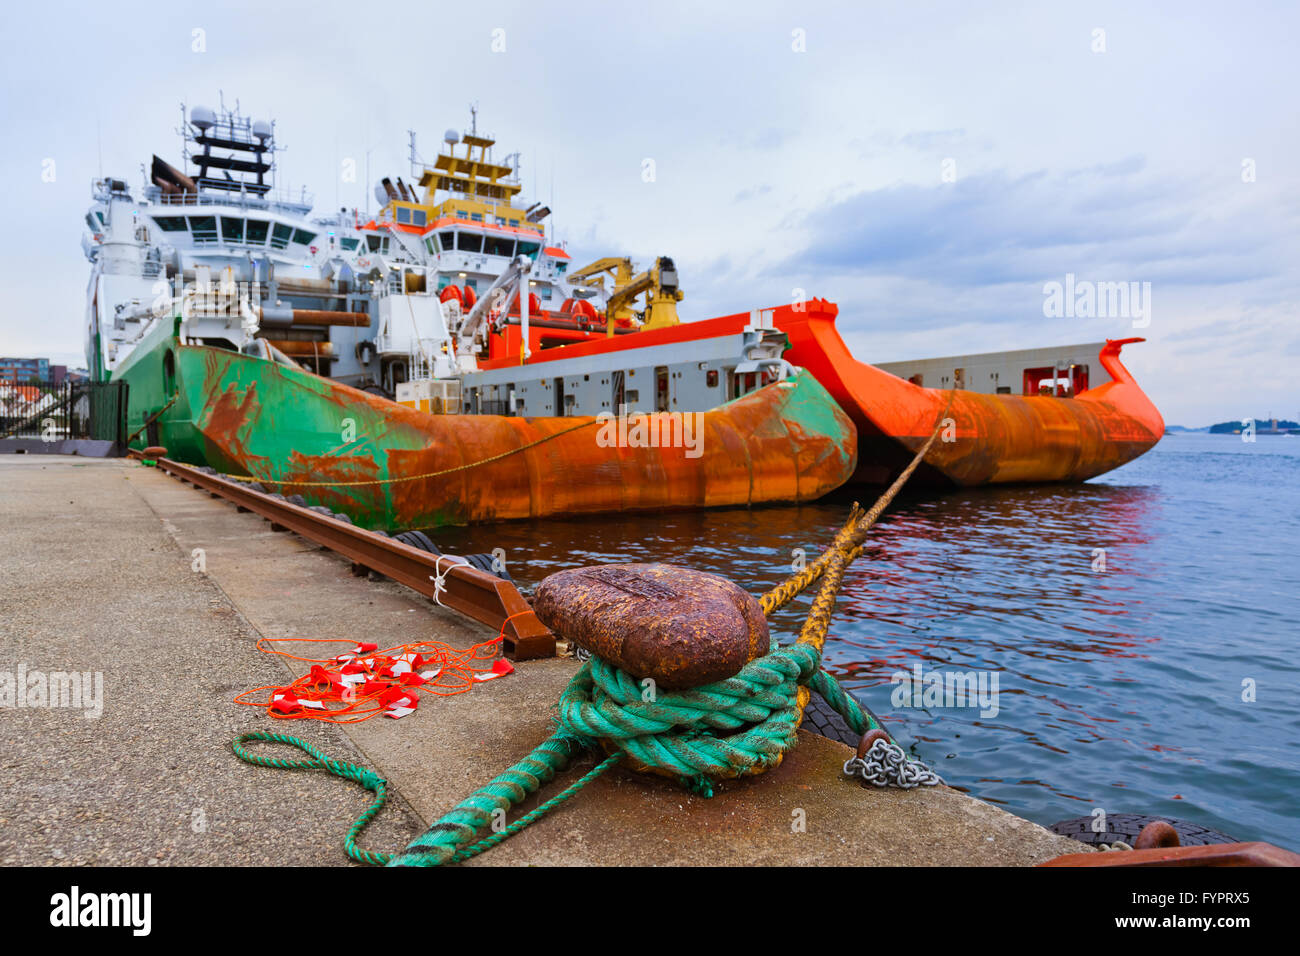 Large industrial ship in Stavanger port - Norway Stock Photo